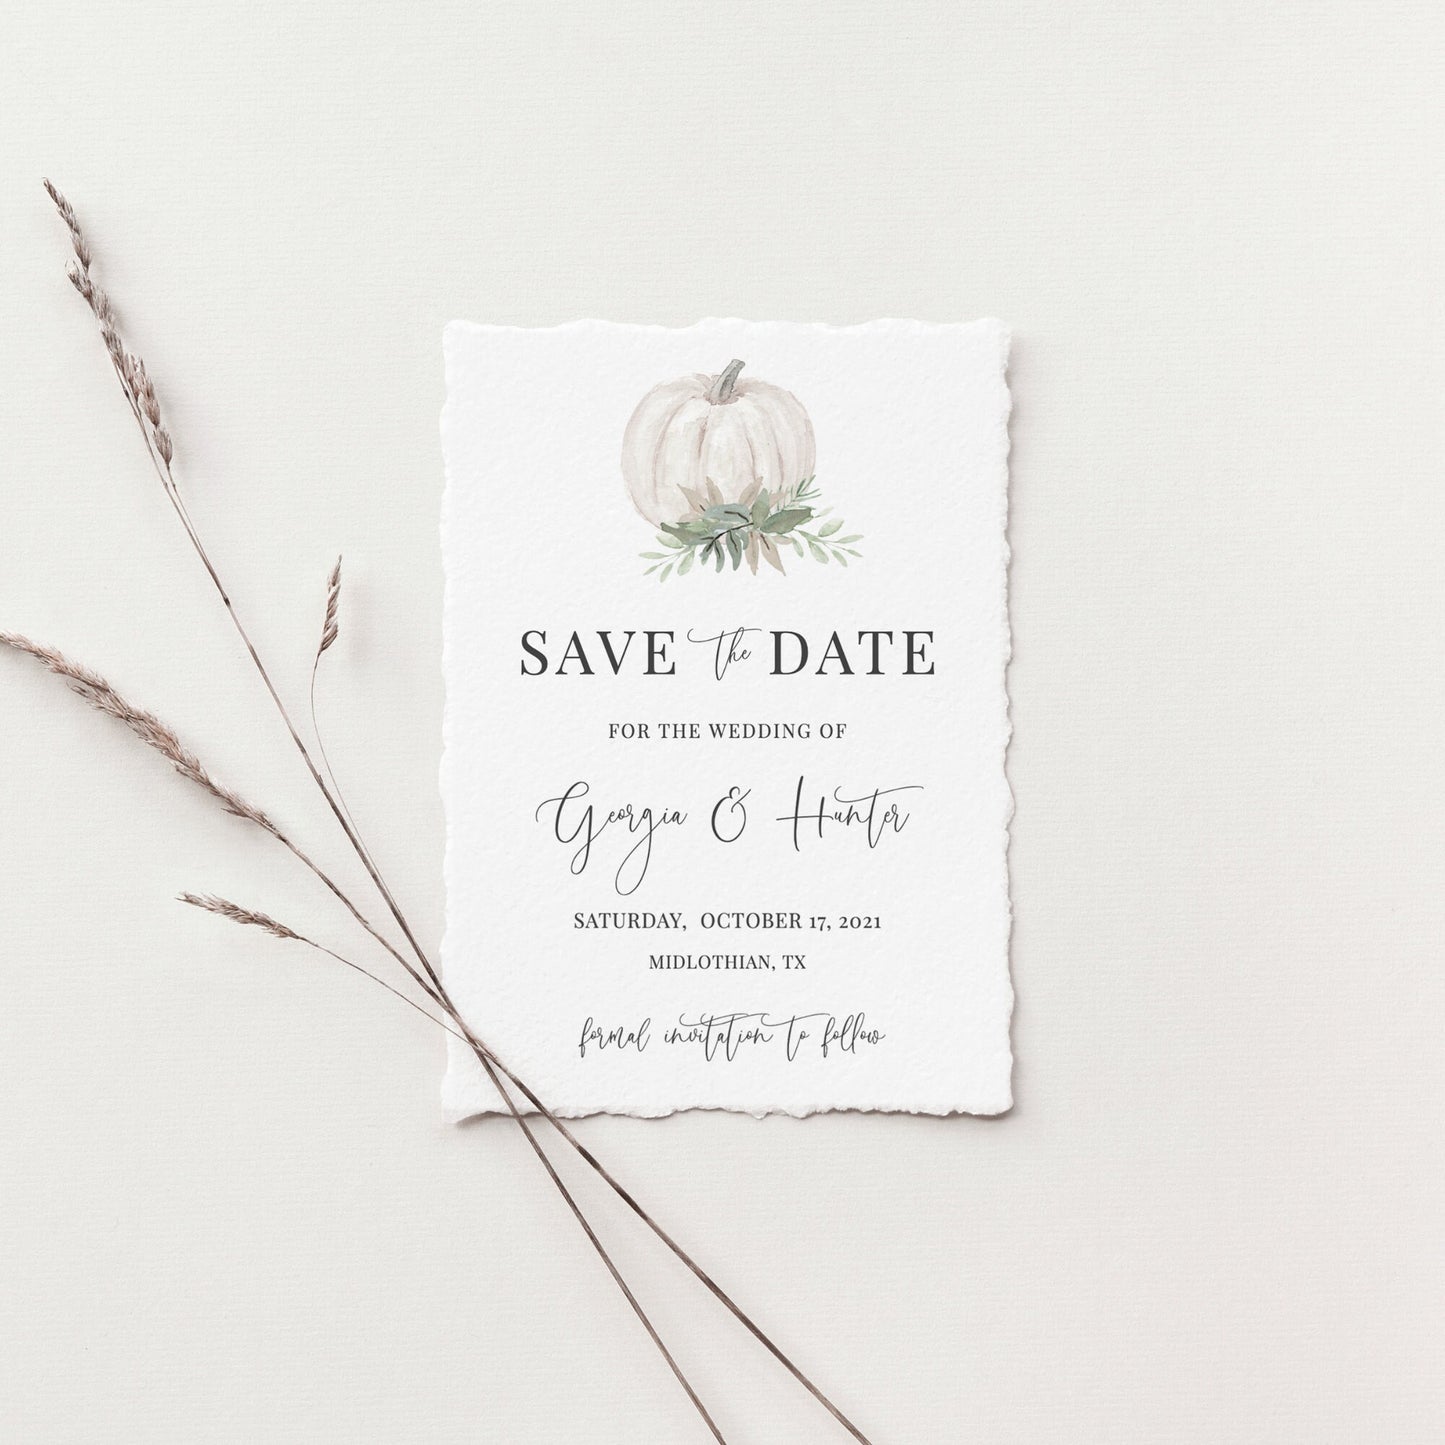 Editable Pumpkin Save the Date Save the Date Cards Wedding Announcement Text Digital Template